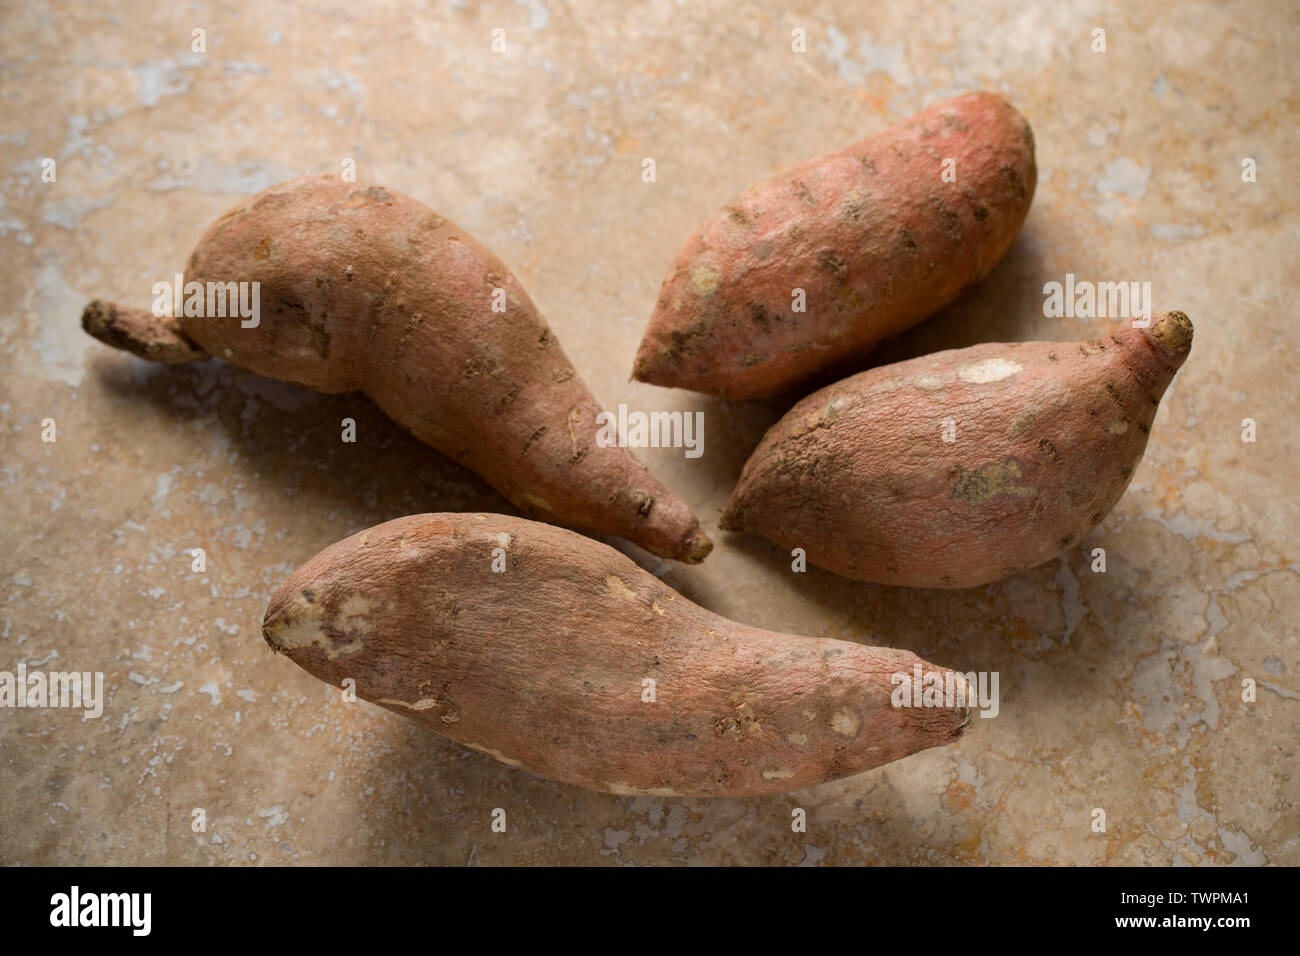 Raw, uncooked sweet potatoes imported from the USA and bought from a supermarket in the UK displayed on a light stone background. Dorset England UK GB Stock Photo